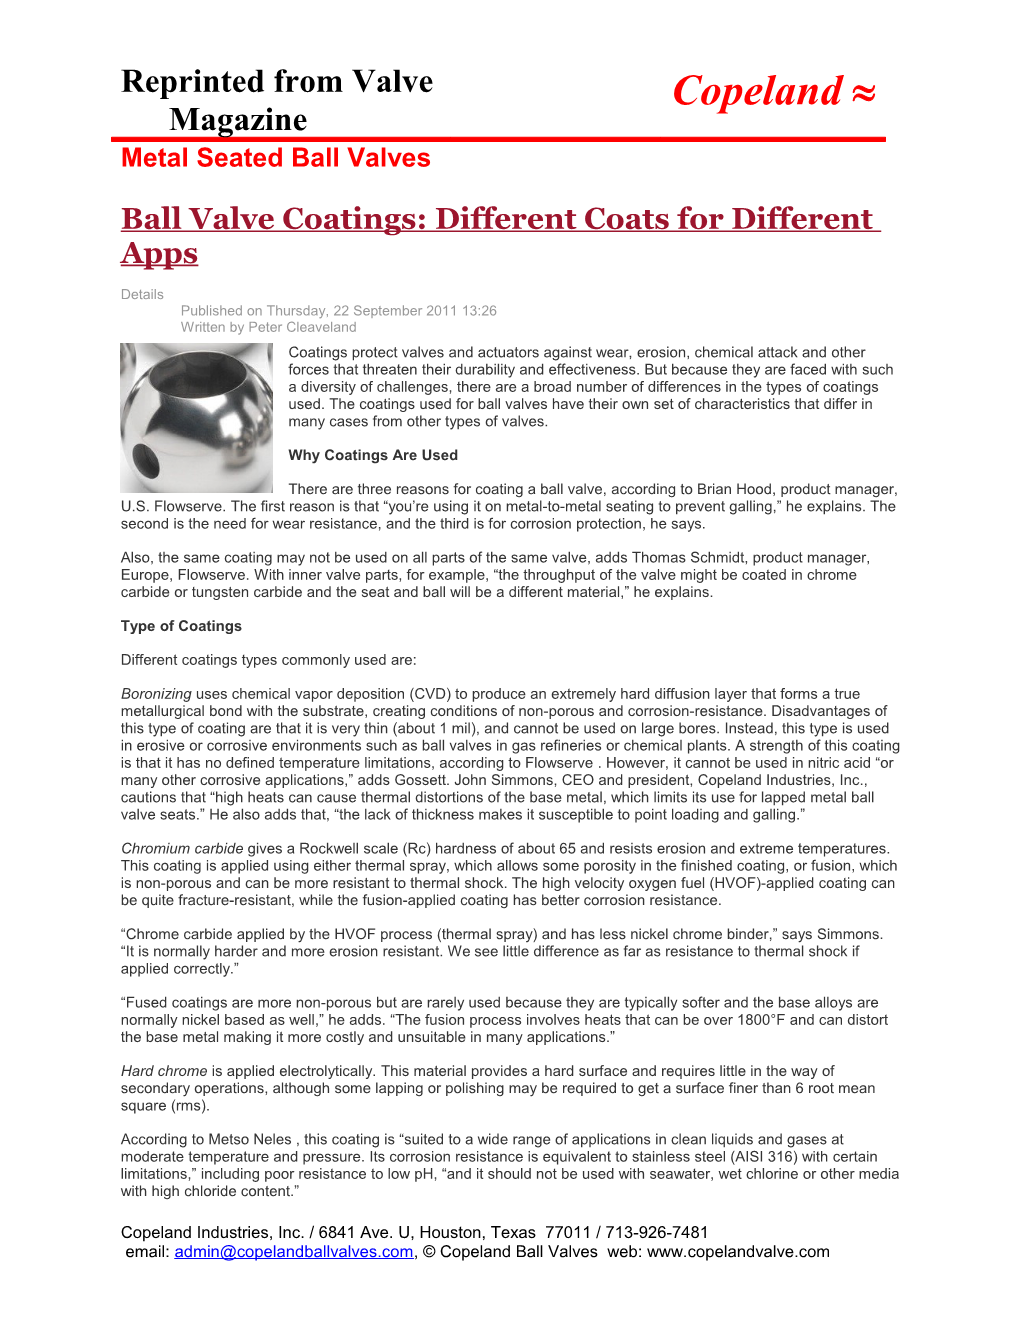 Ball Valve Coatings: Different Coats for Different Apps